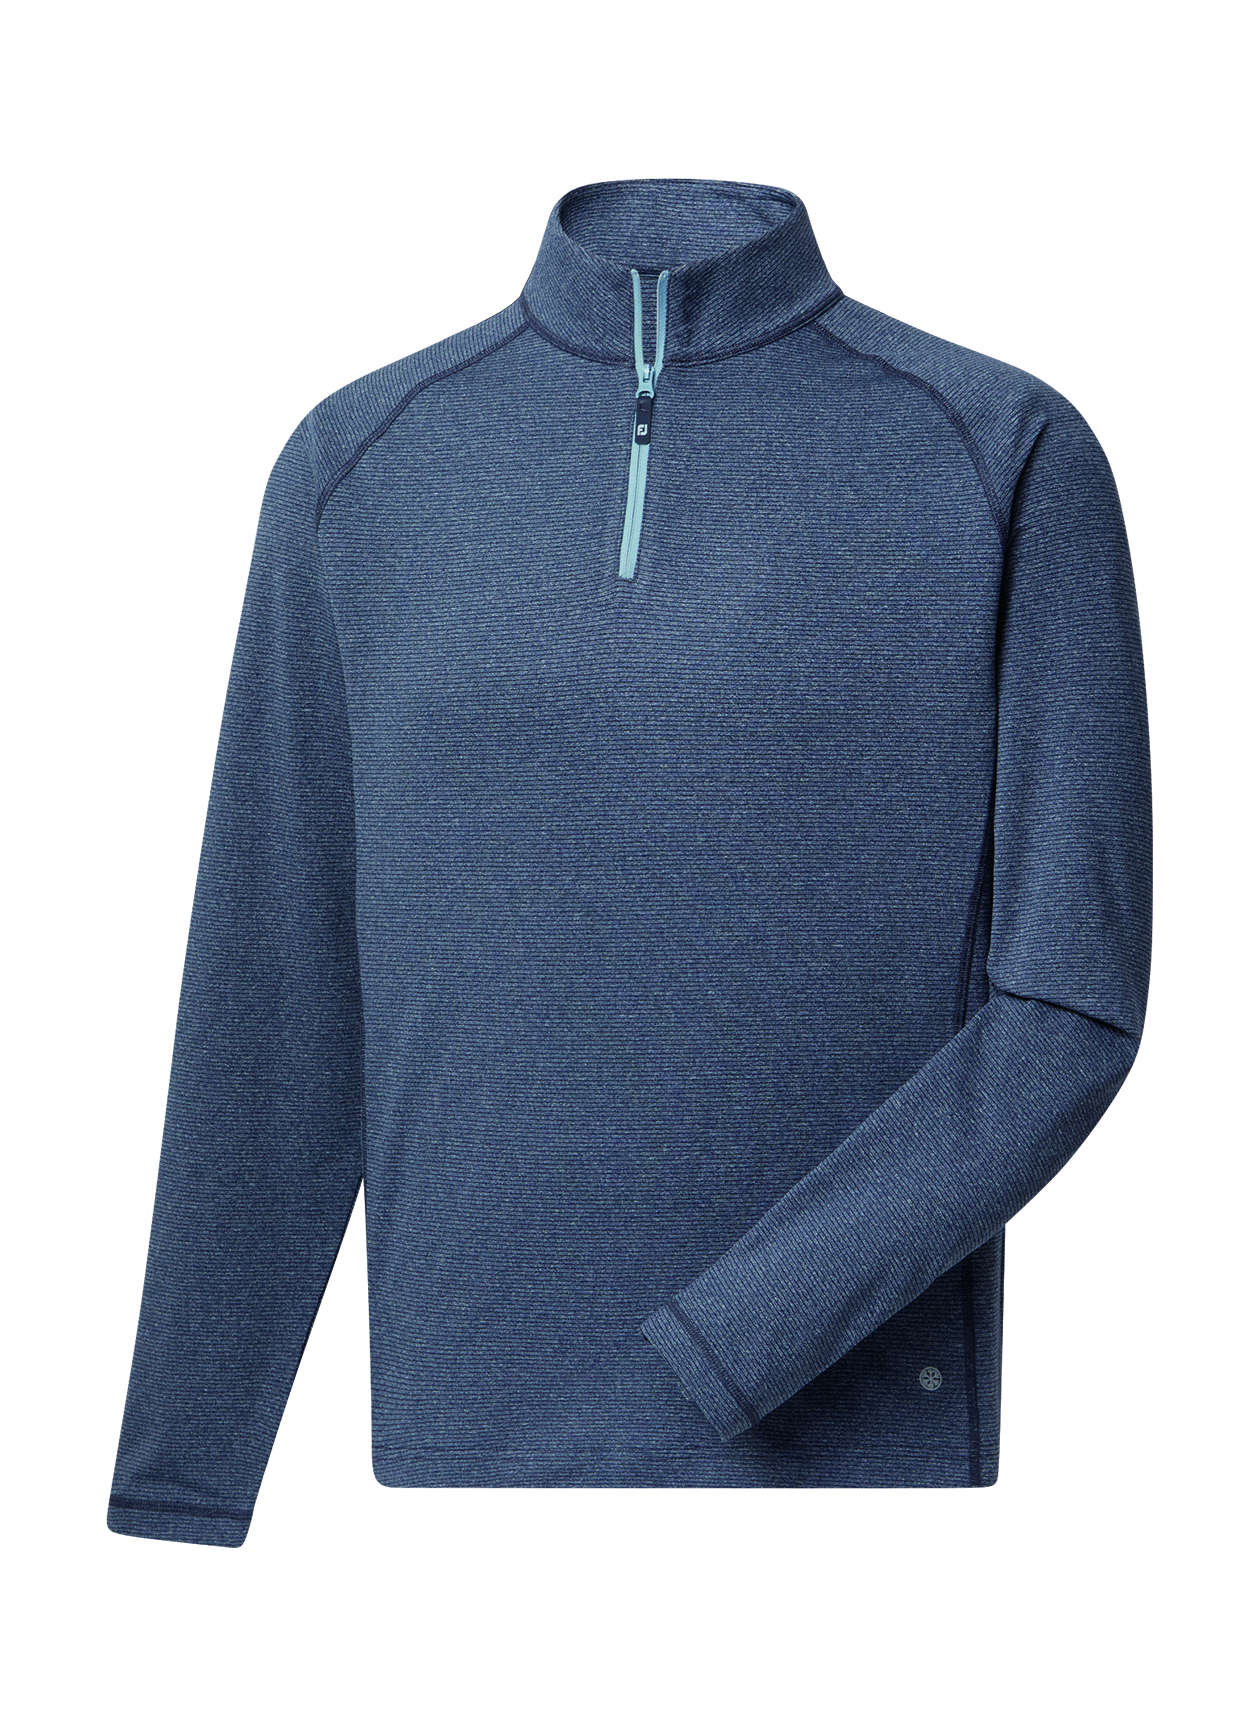 FootJoy Men's Navy Thermoseries Heather Brushed Back Midlayer